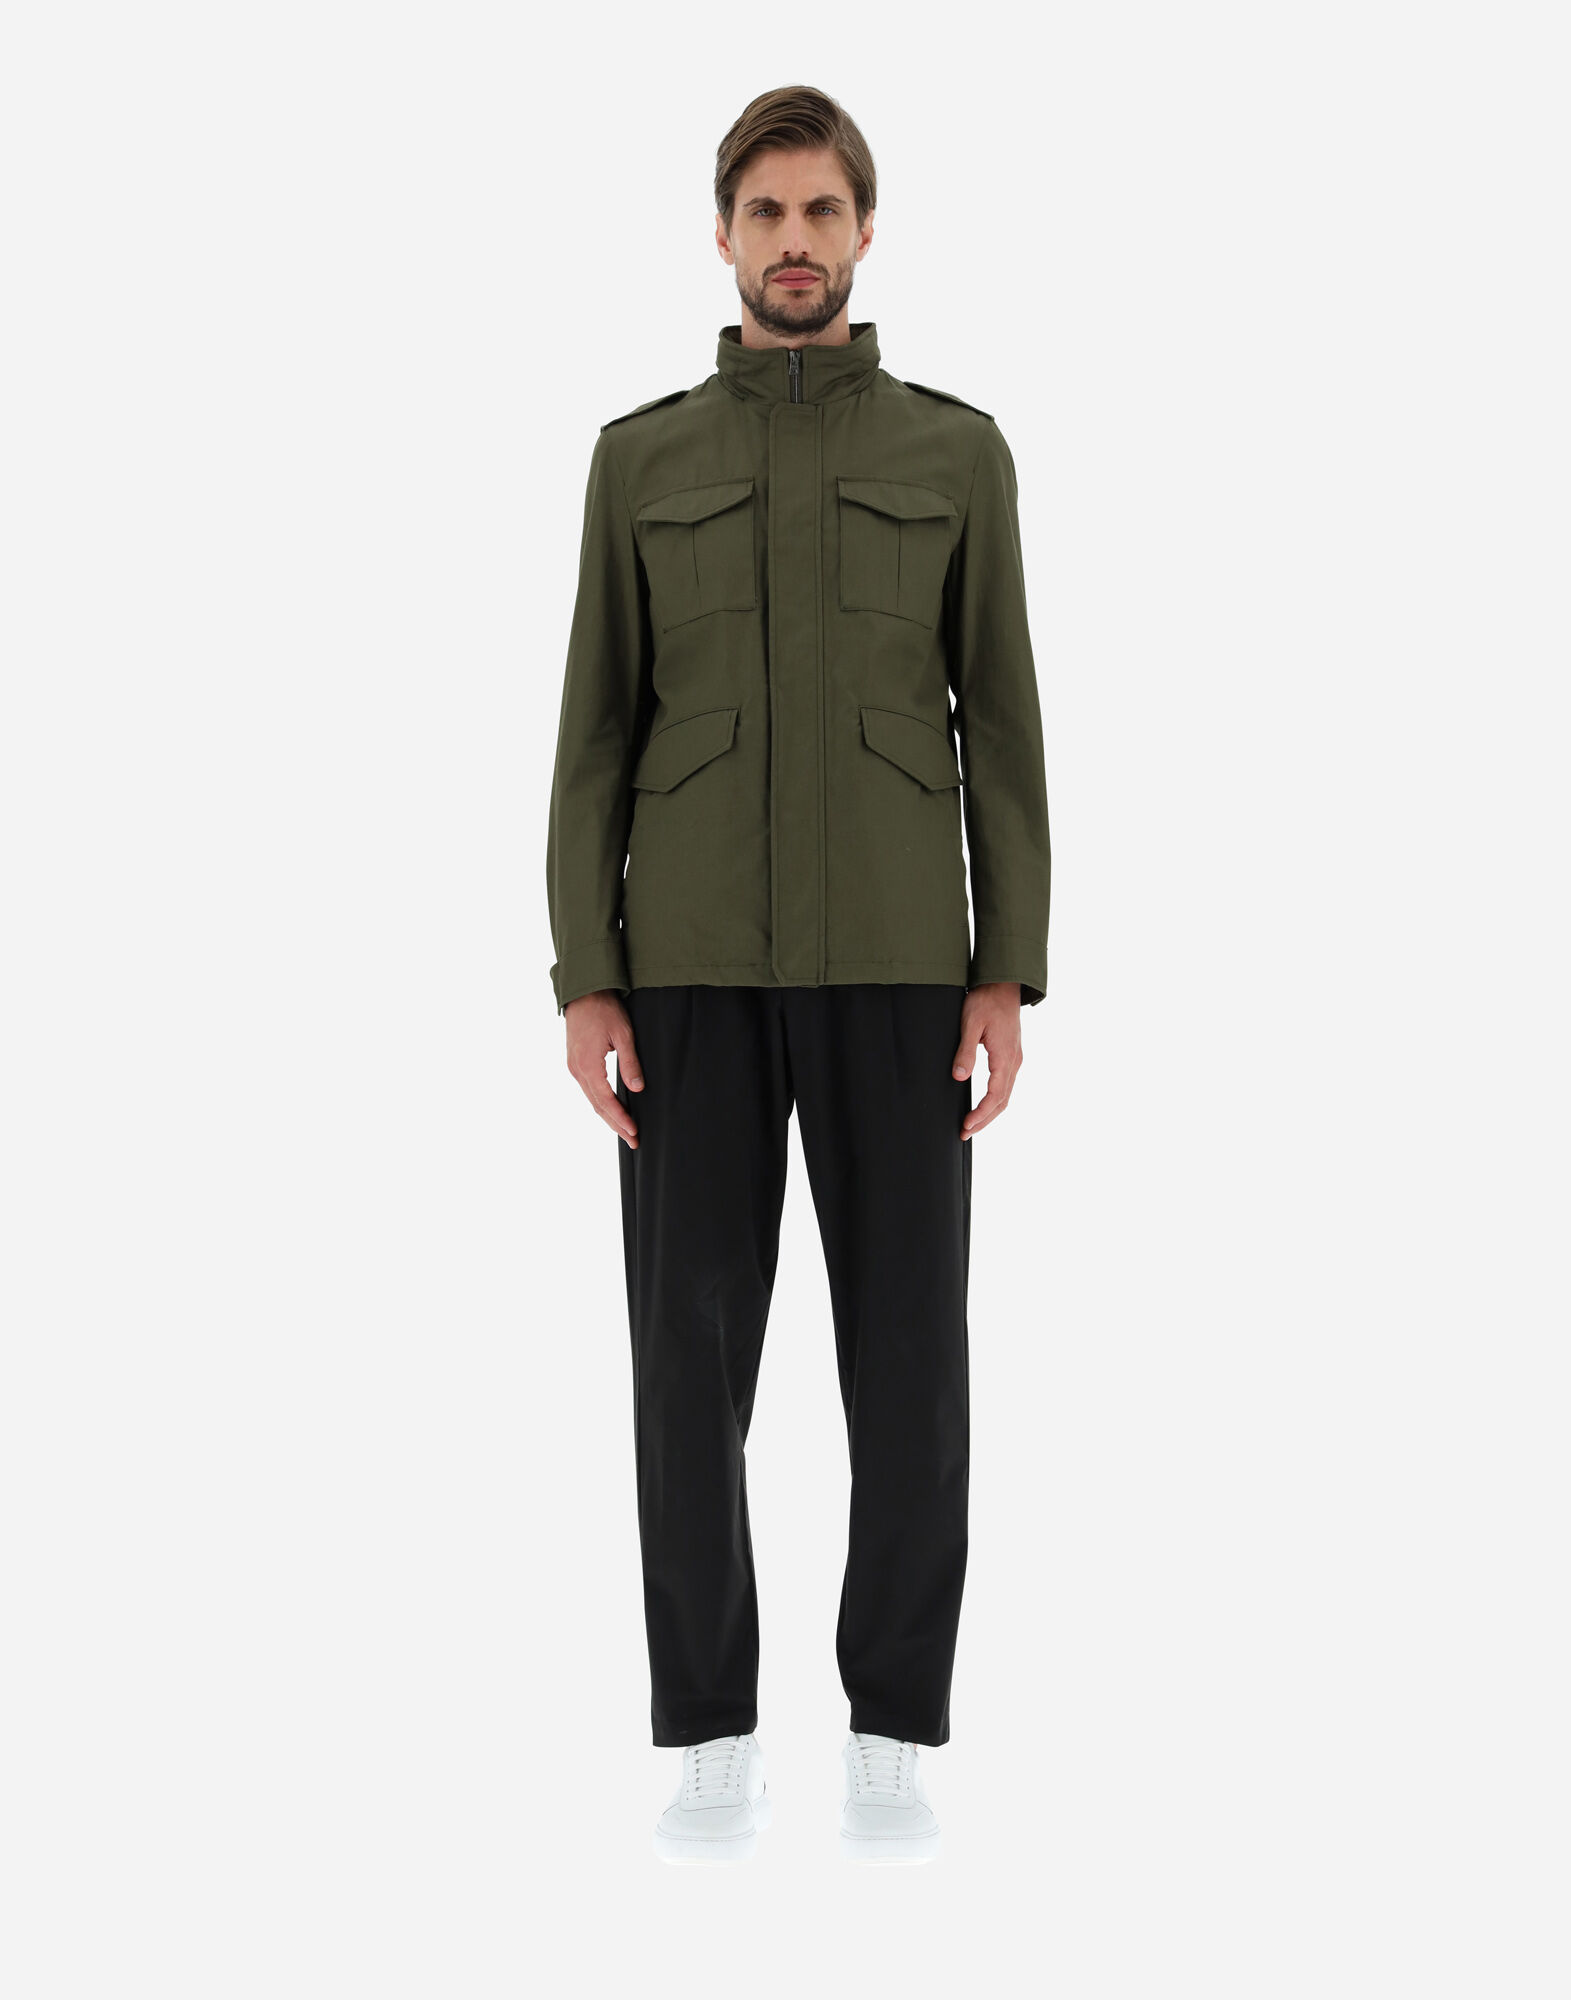 FIELD JACKET IN LIGHT COTTON STRETCH in Light Military for 